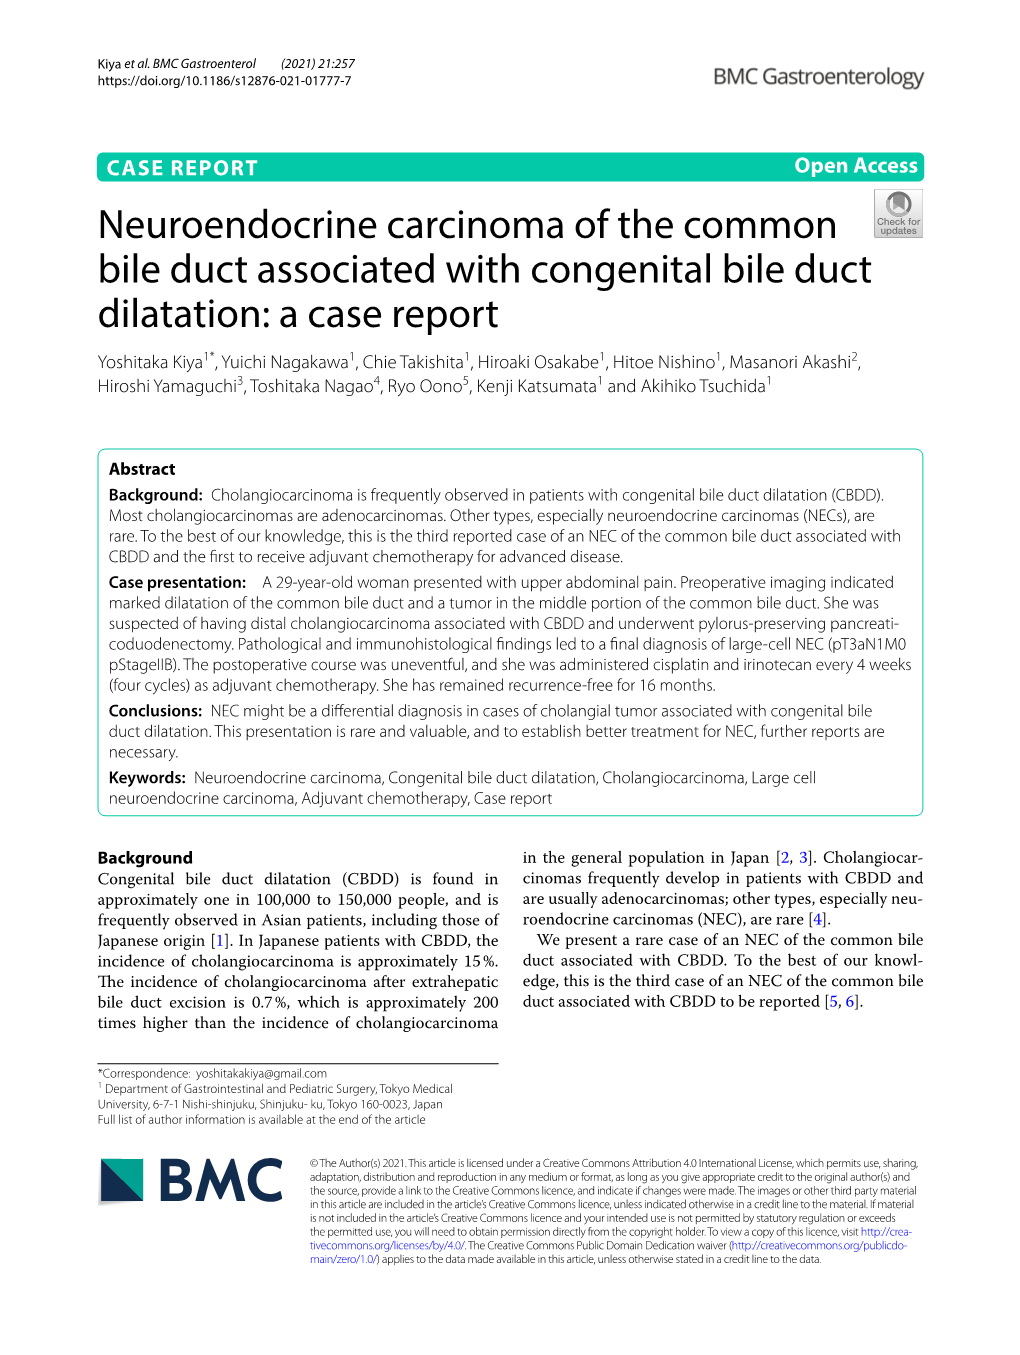 Neuroendocrine Carcinoma of the Common Bile Duct Associated With